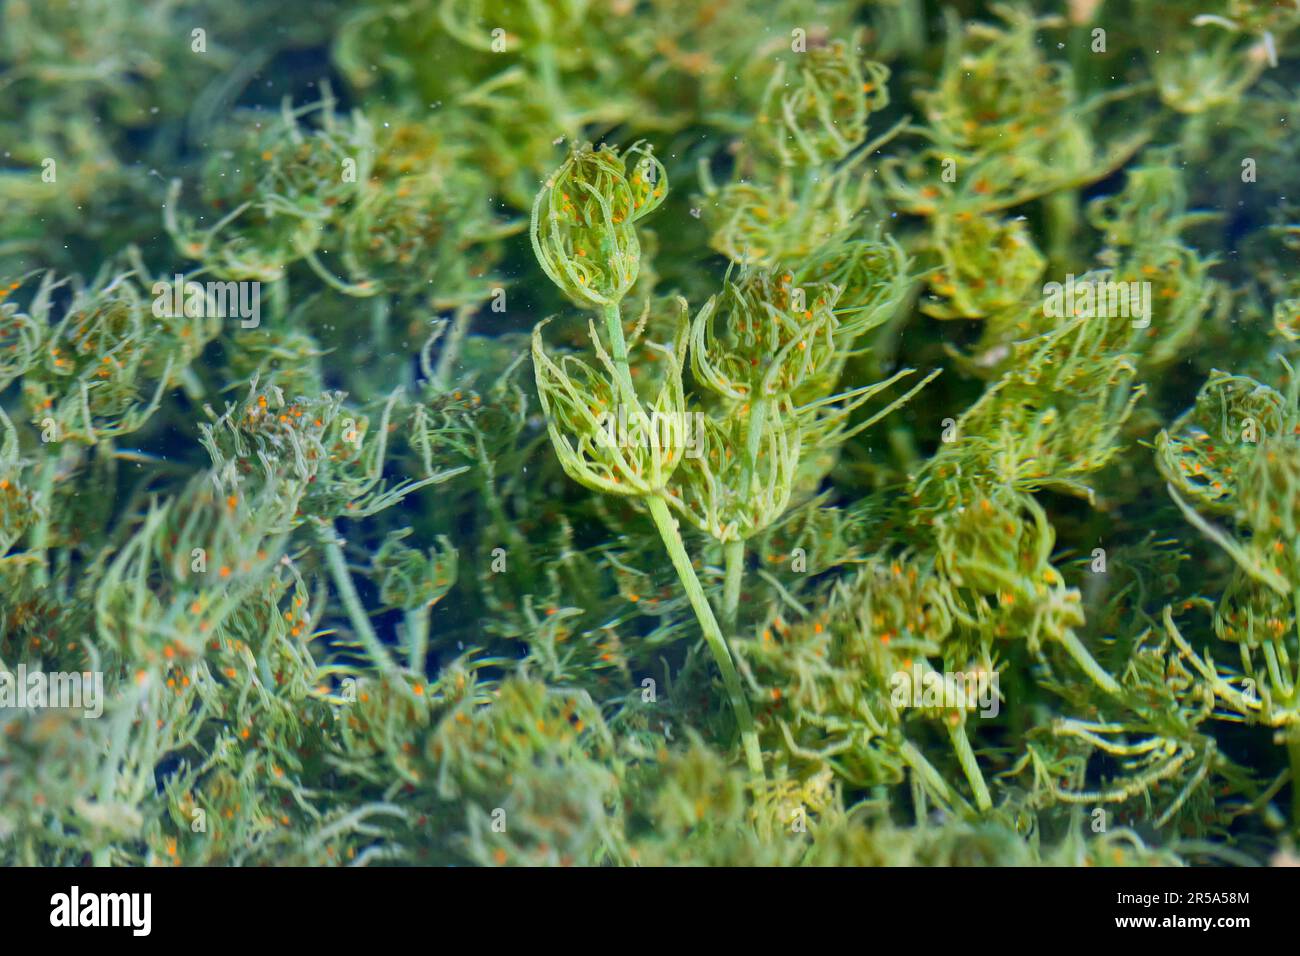 stonewort (Characeae), population of stonewort in a pond, Germany Stock Photo